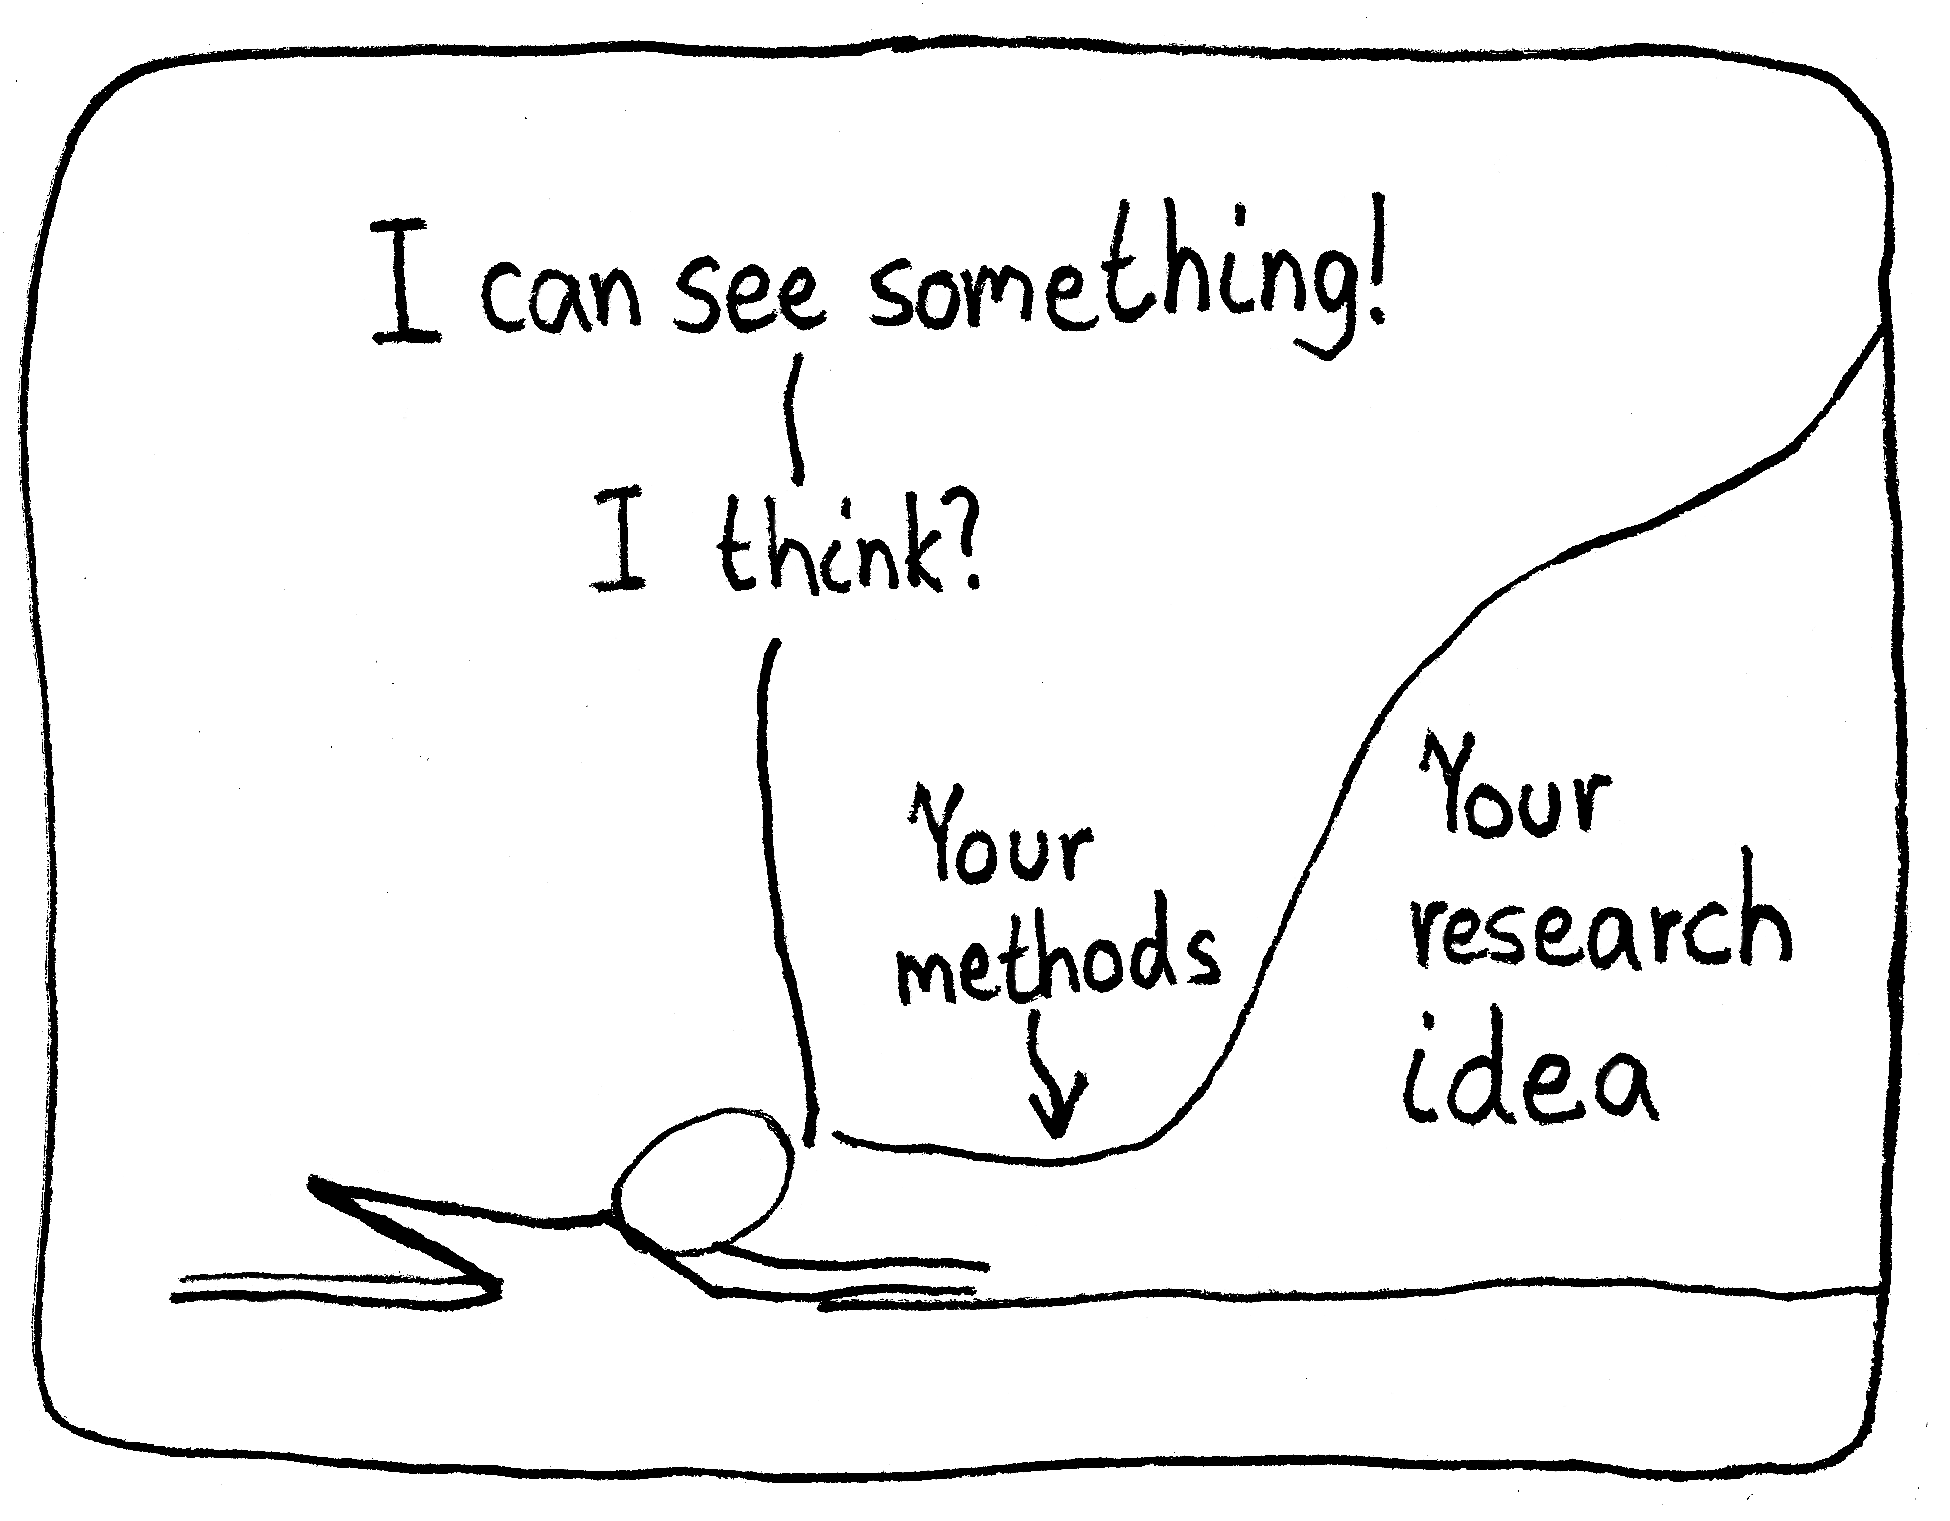 A scientist is on their knees and peers into a small gap, labeled "Your methods", to a cavern labeled "Your research idea". The scientist says, "I can see something! (Pause) I think."